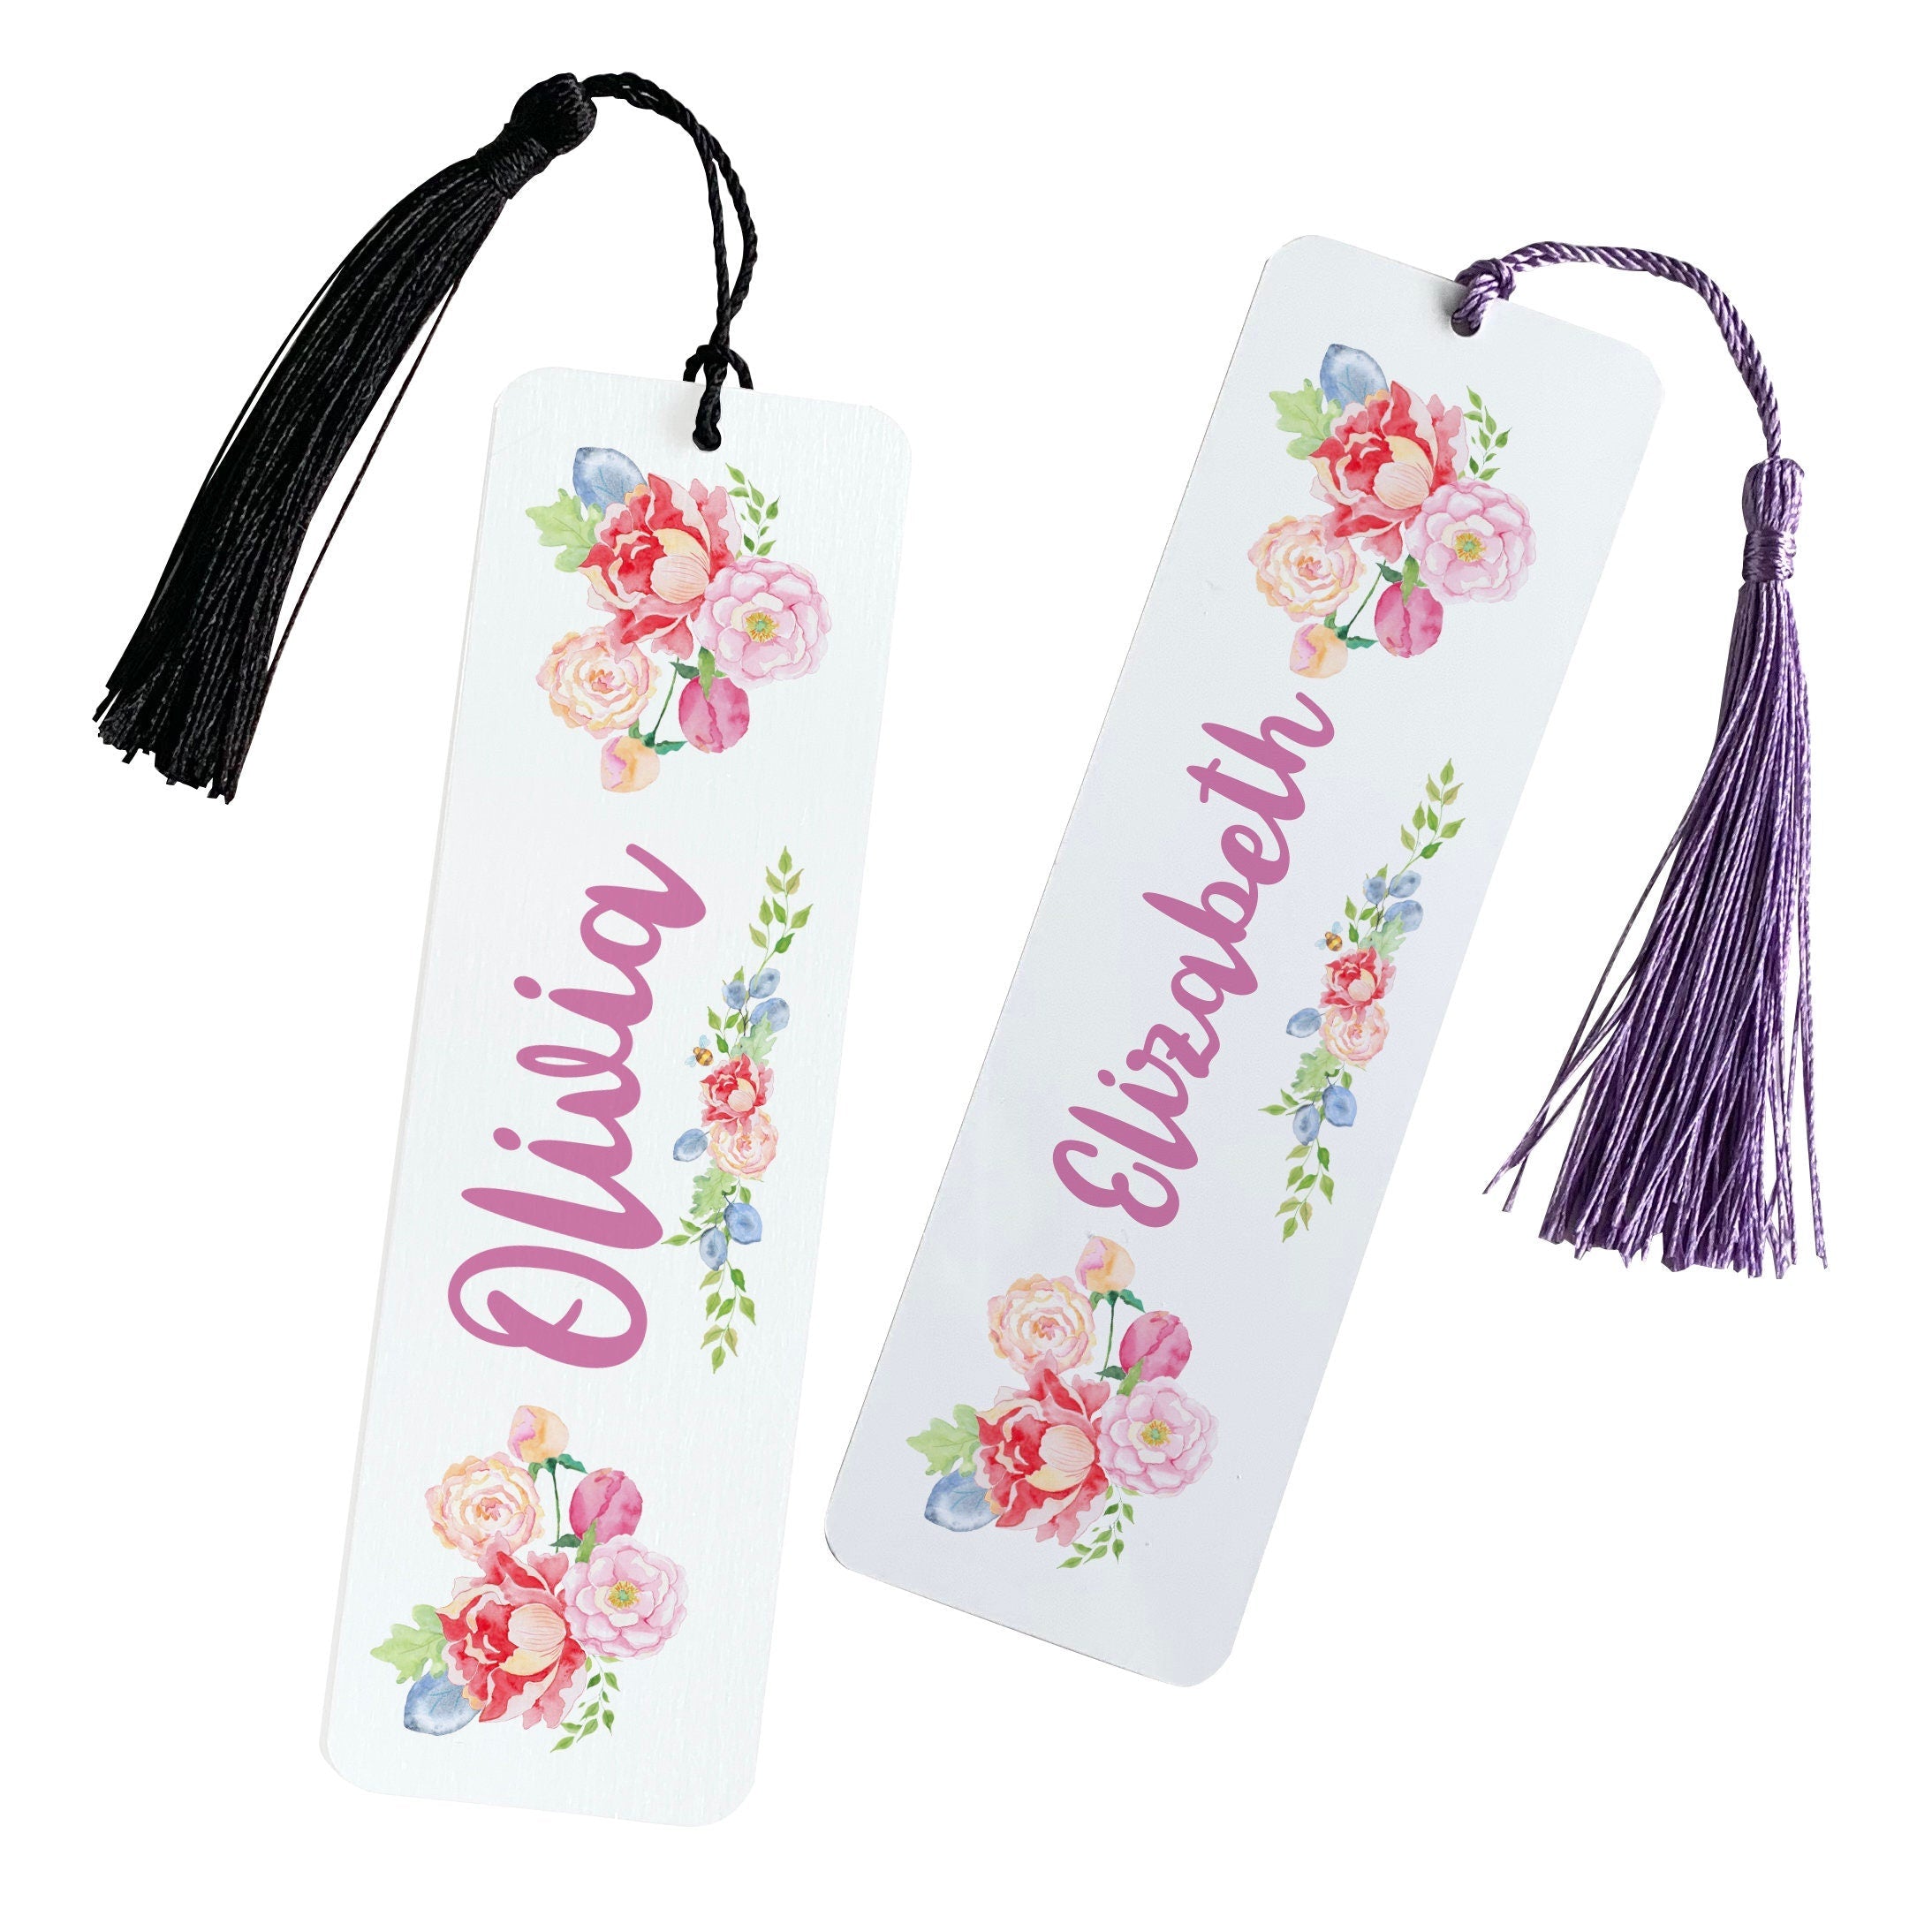 Personalised floral name bookmark with tassel, Gift for her, Book lover gift with name